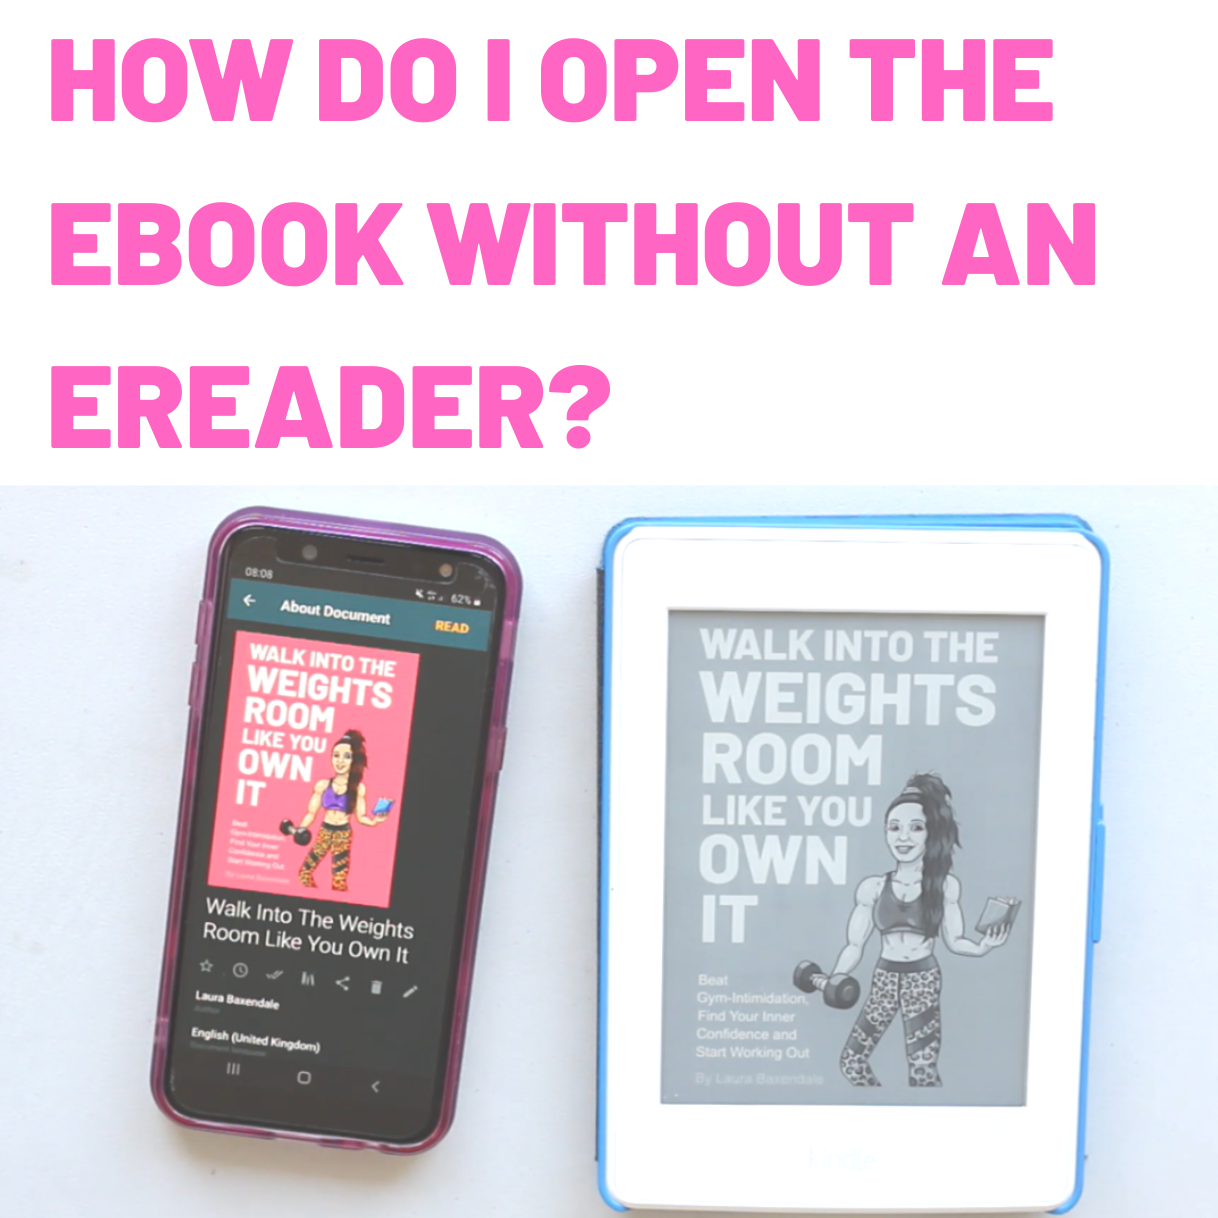 how to read an ebook, read an ebook on your smart phone or mobile phone, ereader app